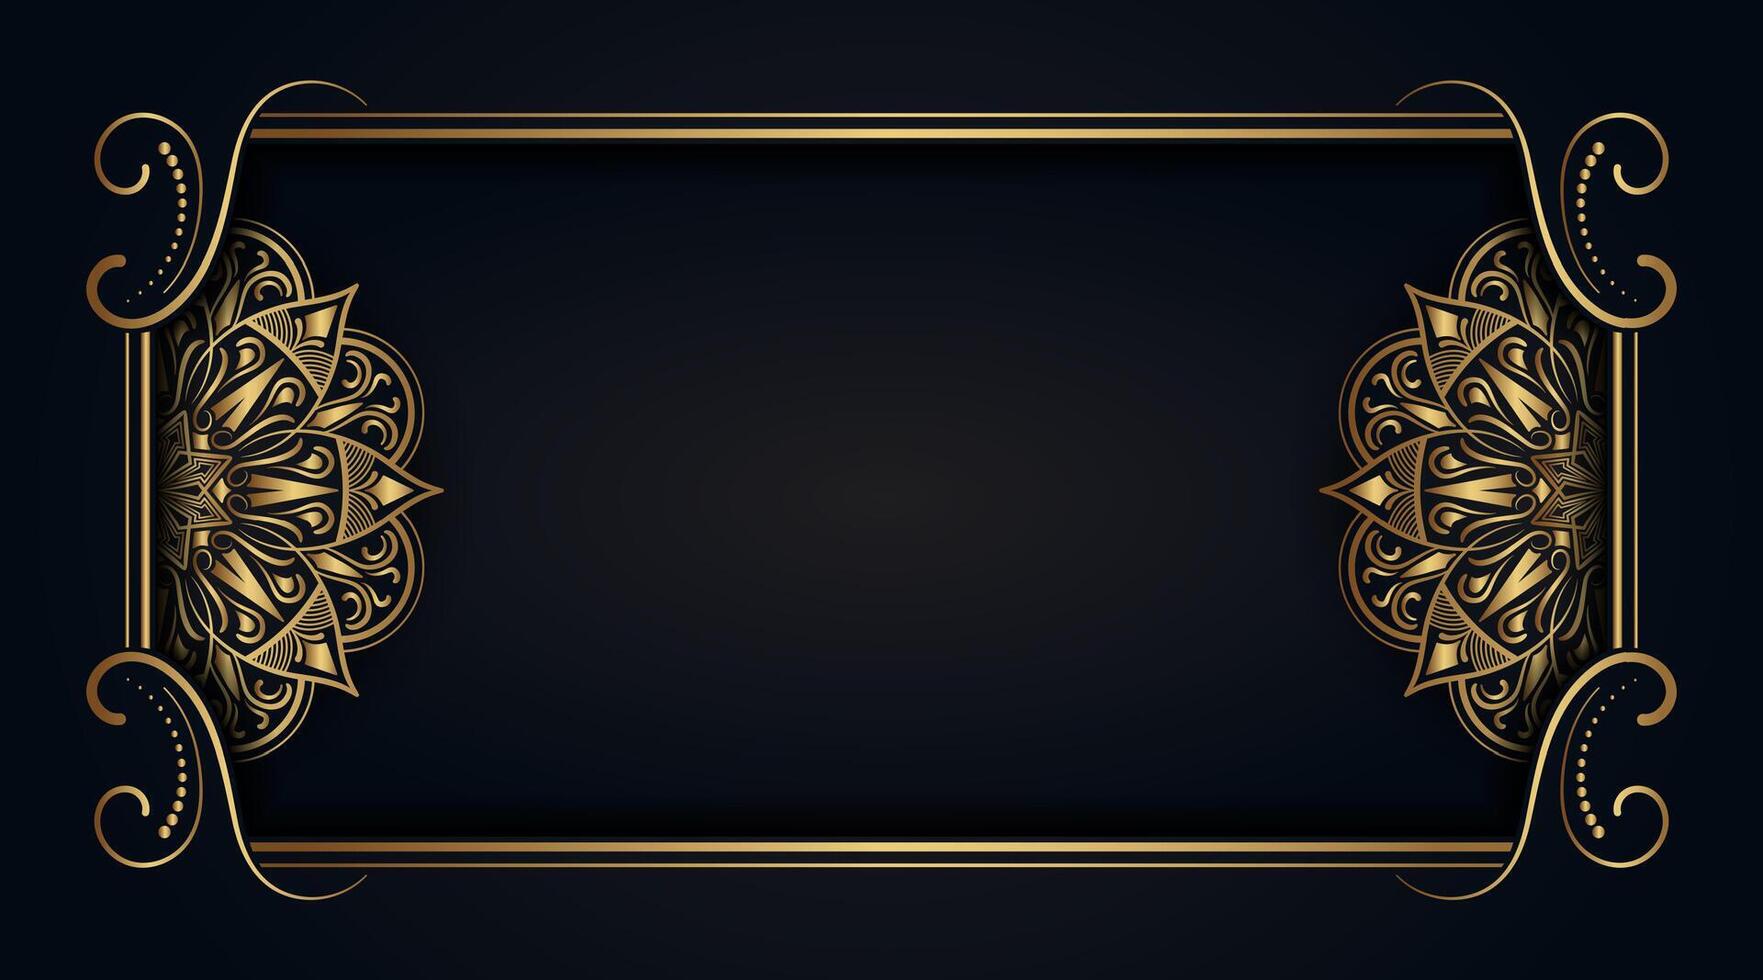 black luxury background with gold mandala ornaments vector